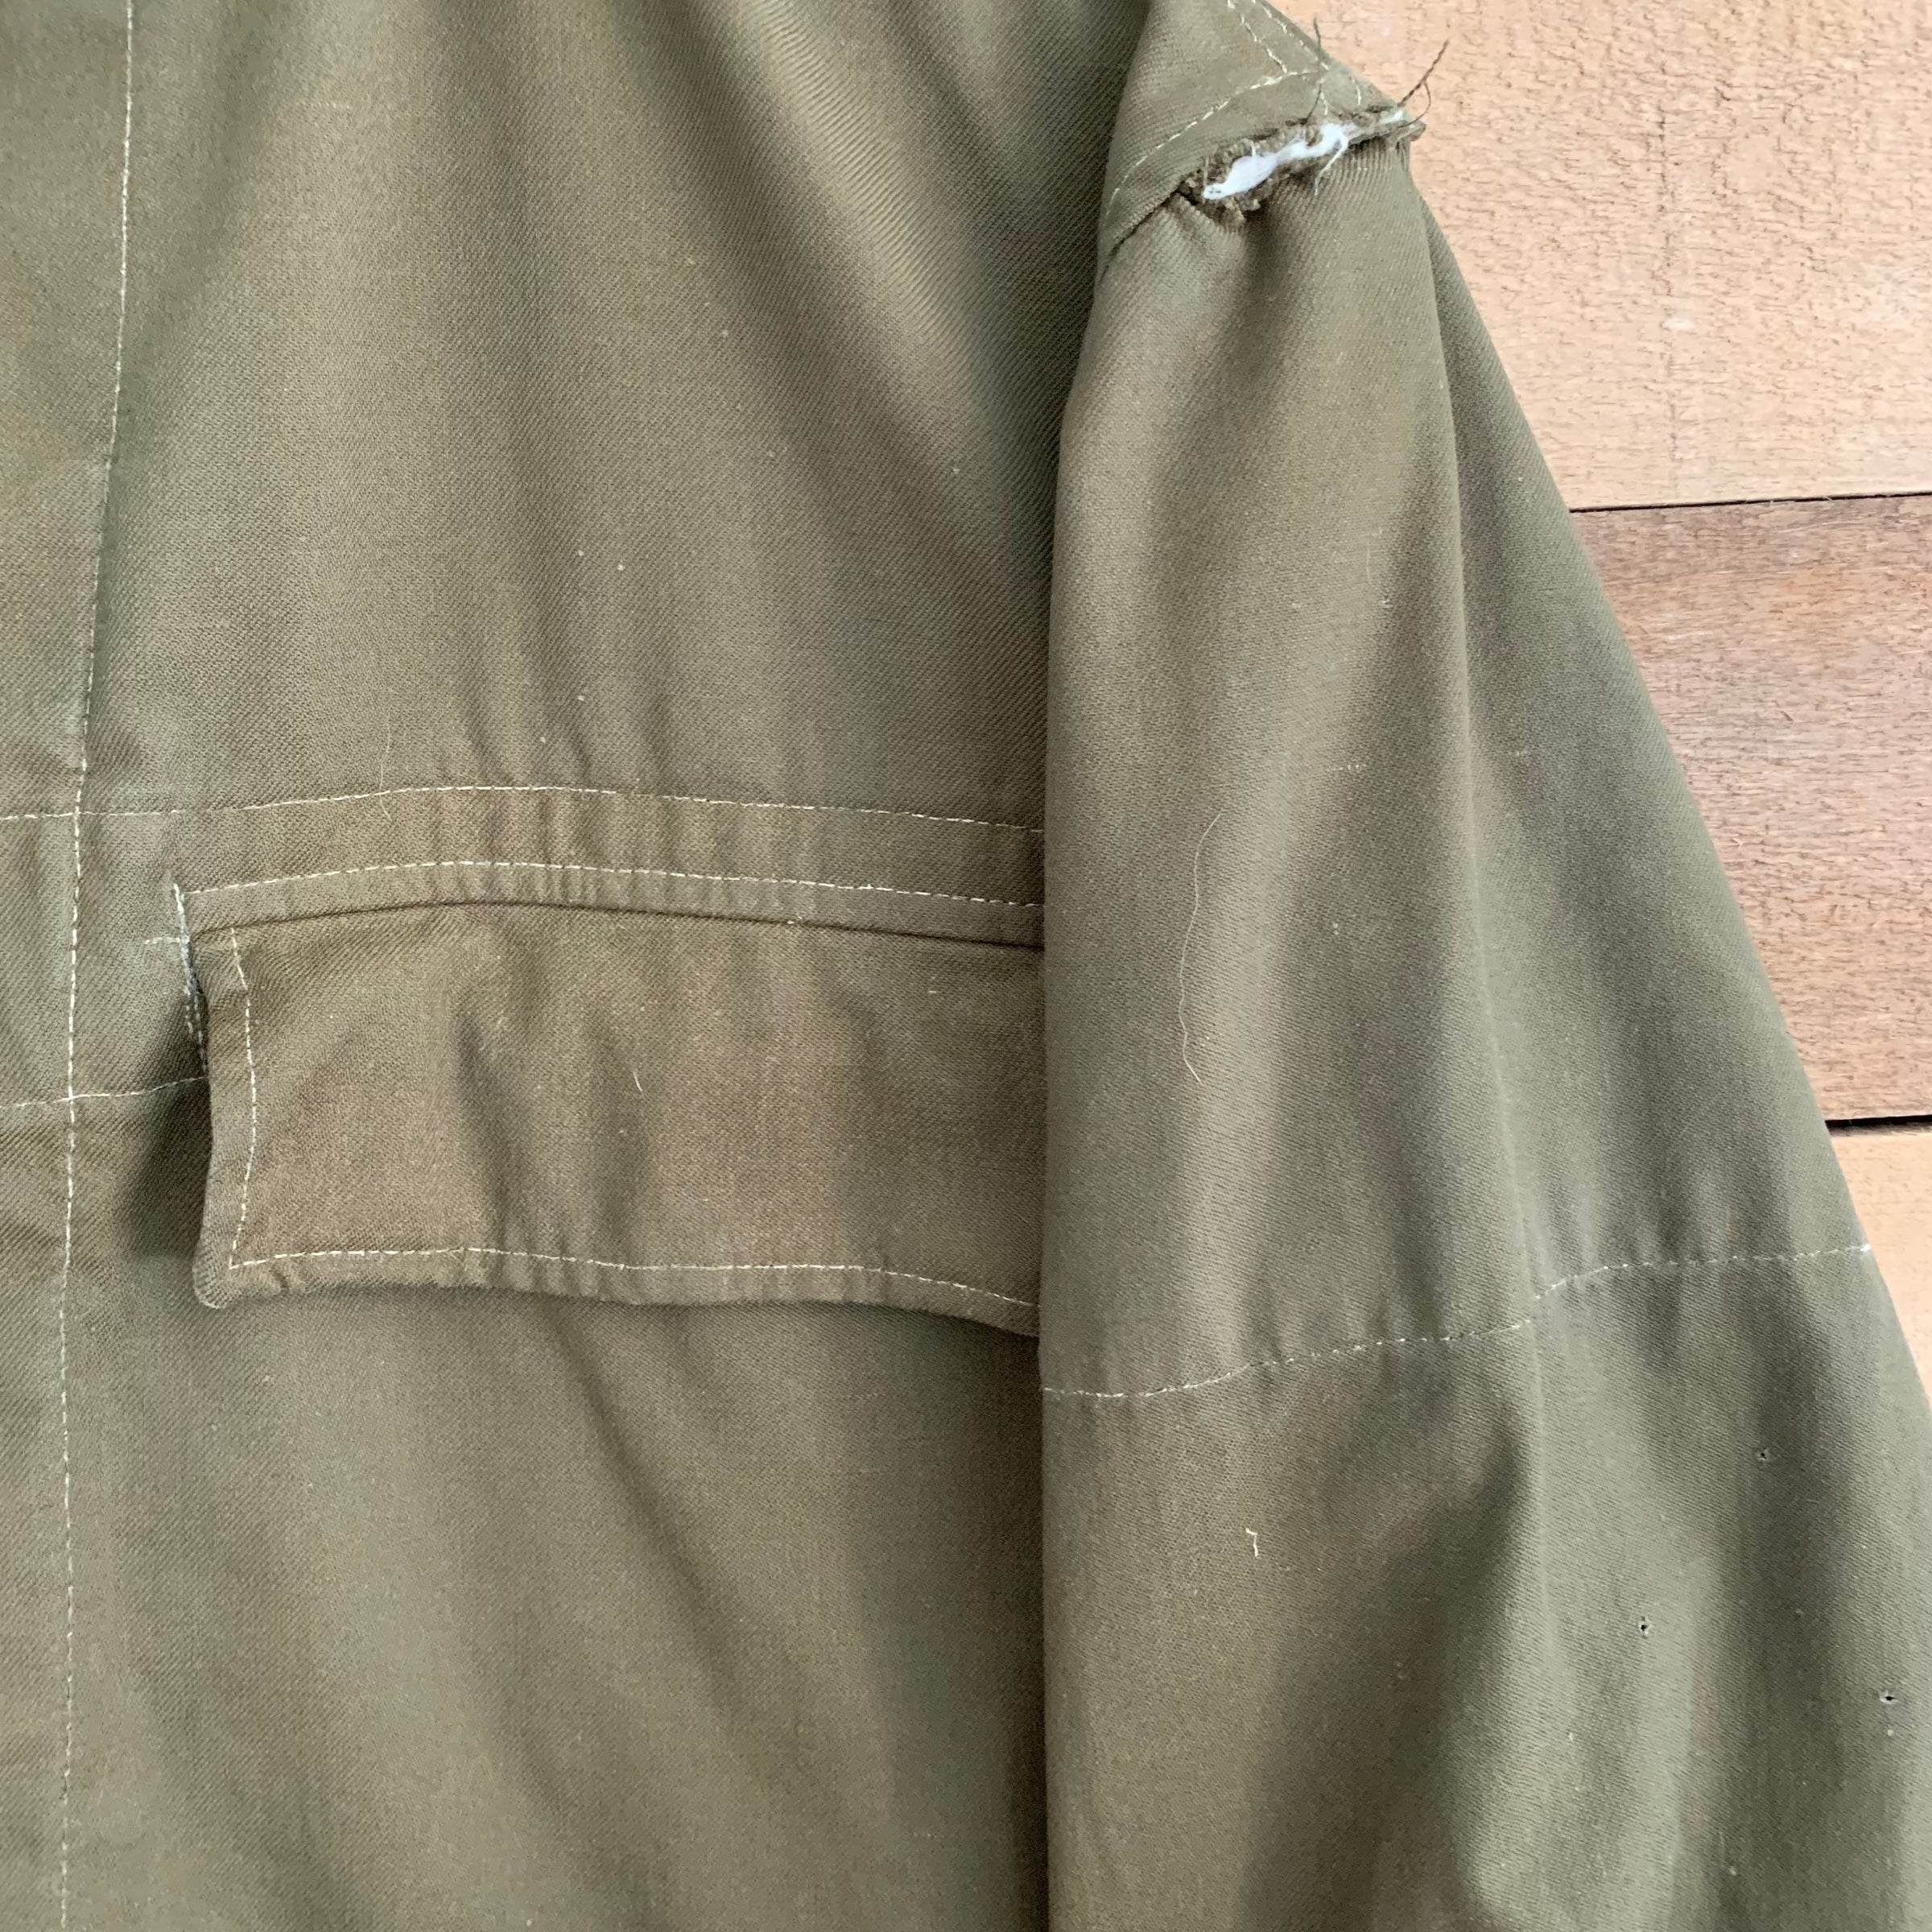 1970’s/1980’s Unknown Military Field Jacket Green with Contrast Stitching Large